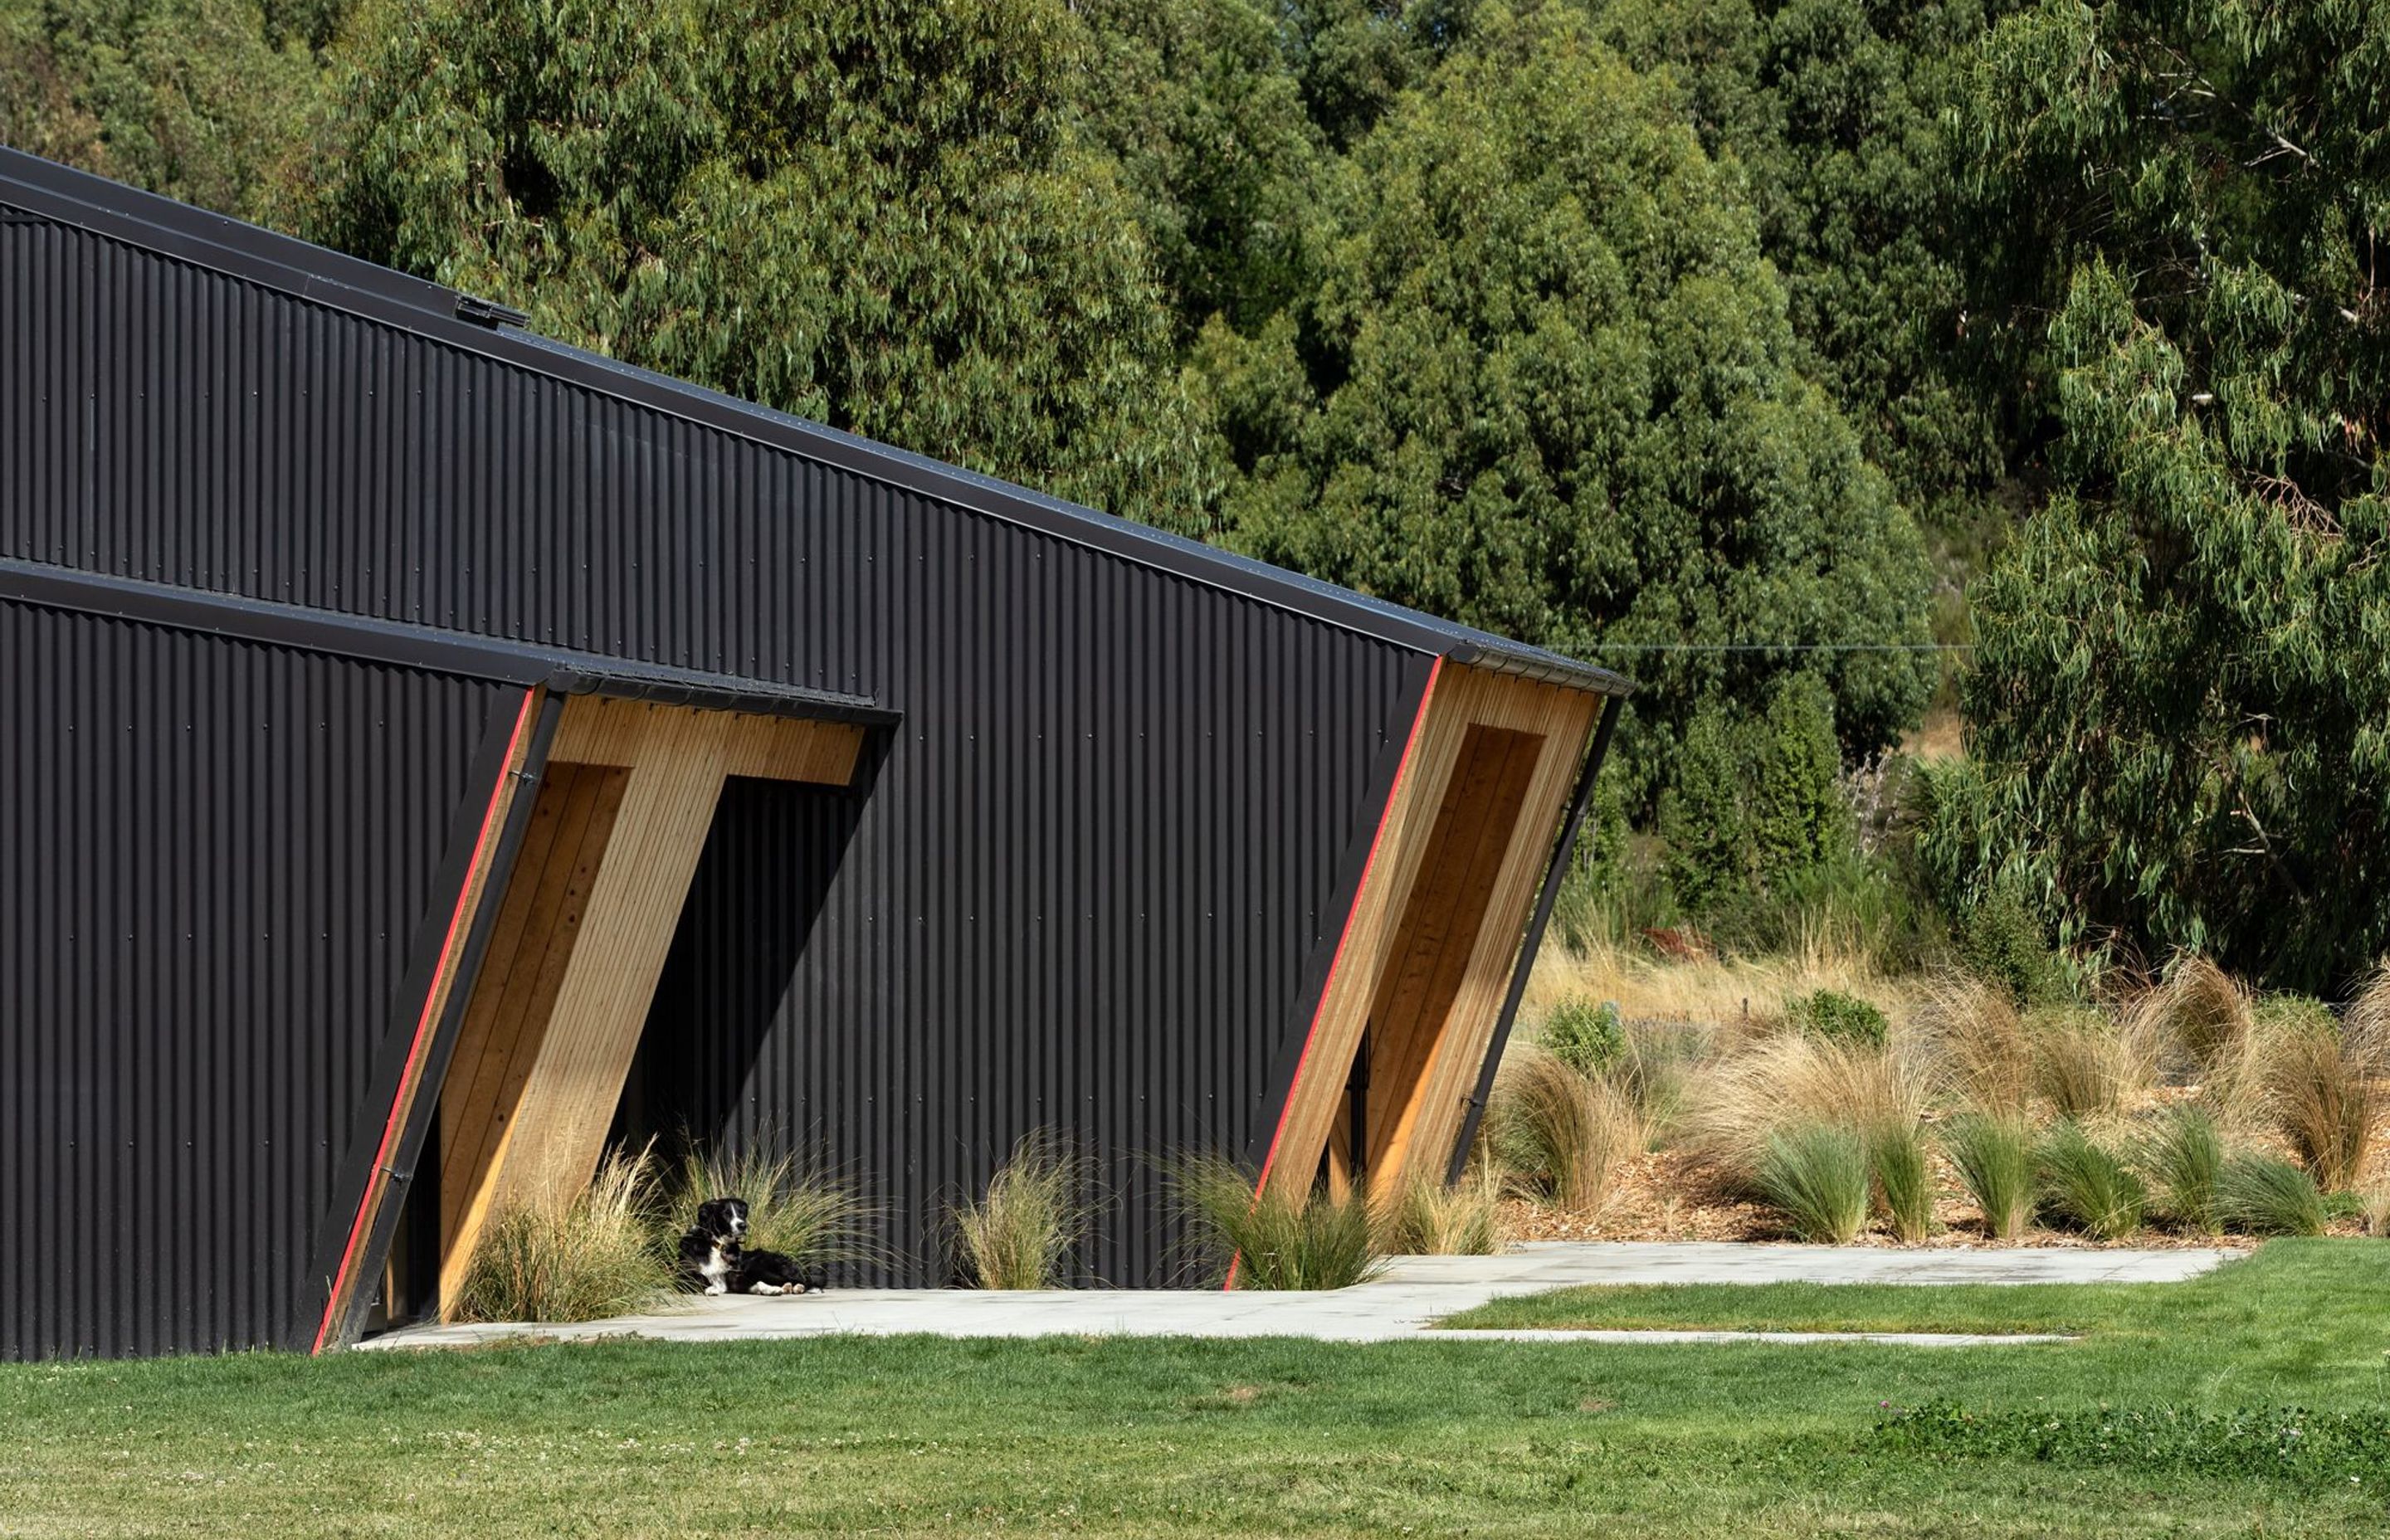 Vertical larch is juxtaposed with corrugated Colorsteel roofing that folds down from the roof.